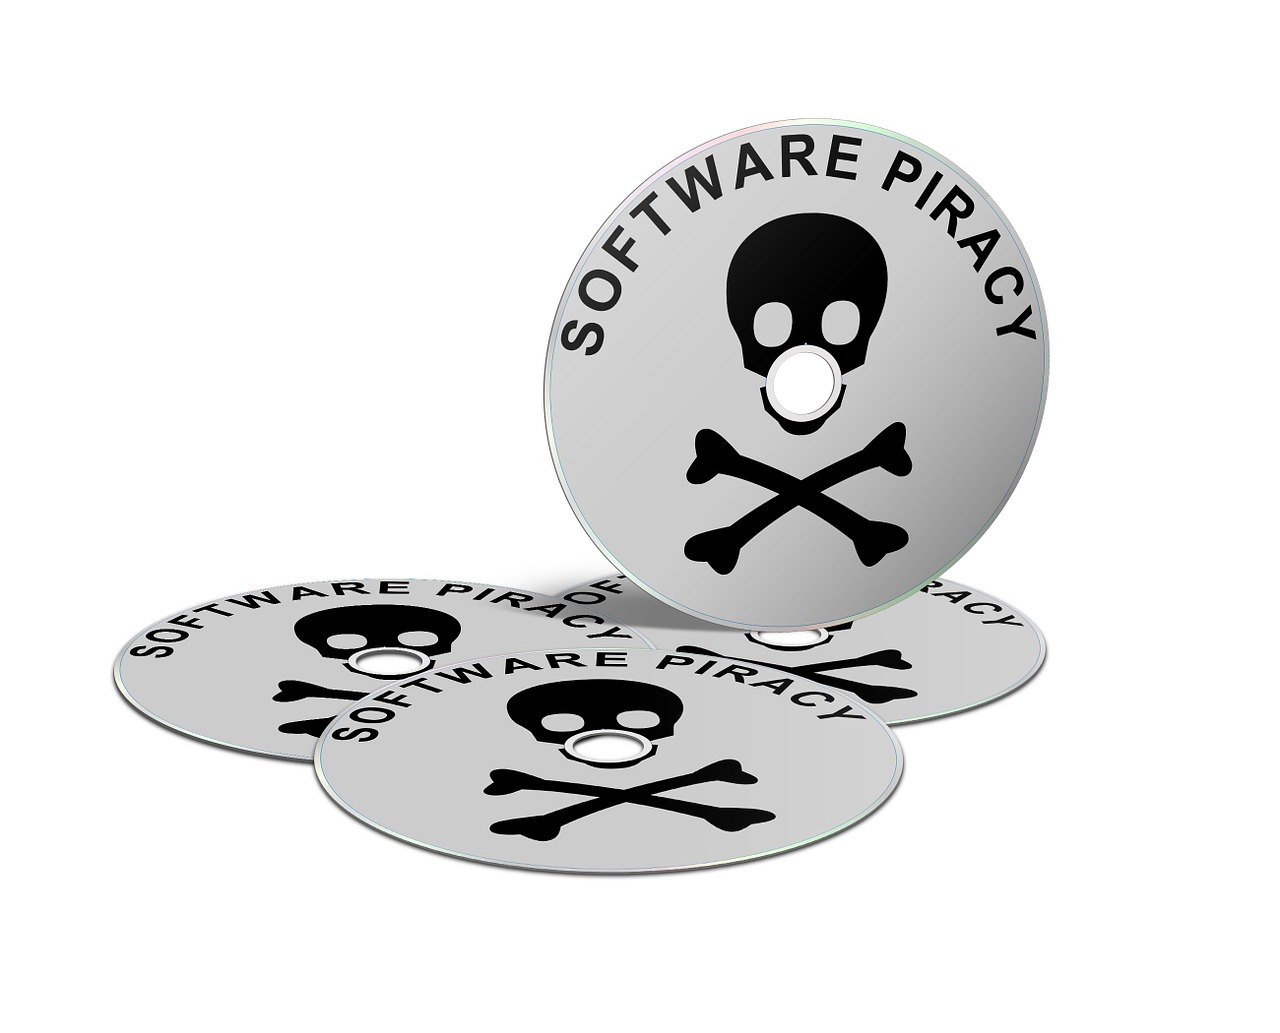 software piracy theft free photo